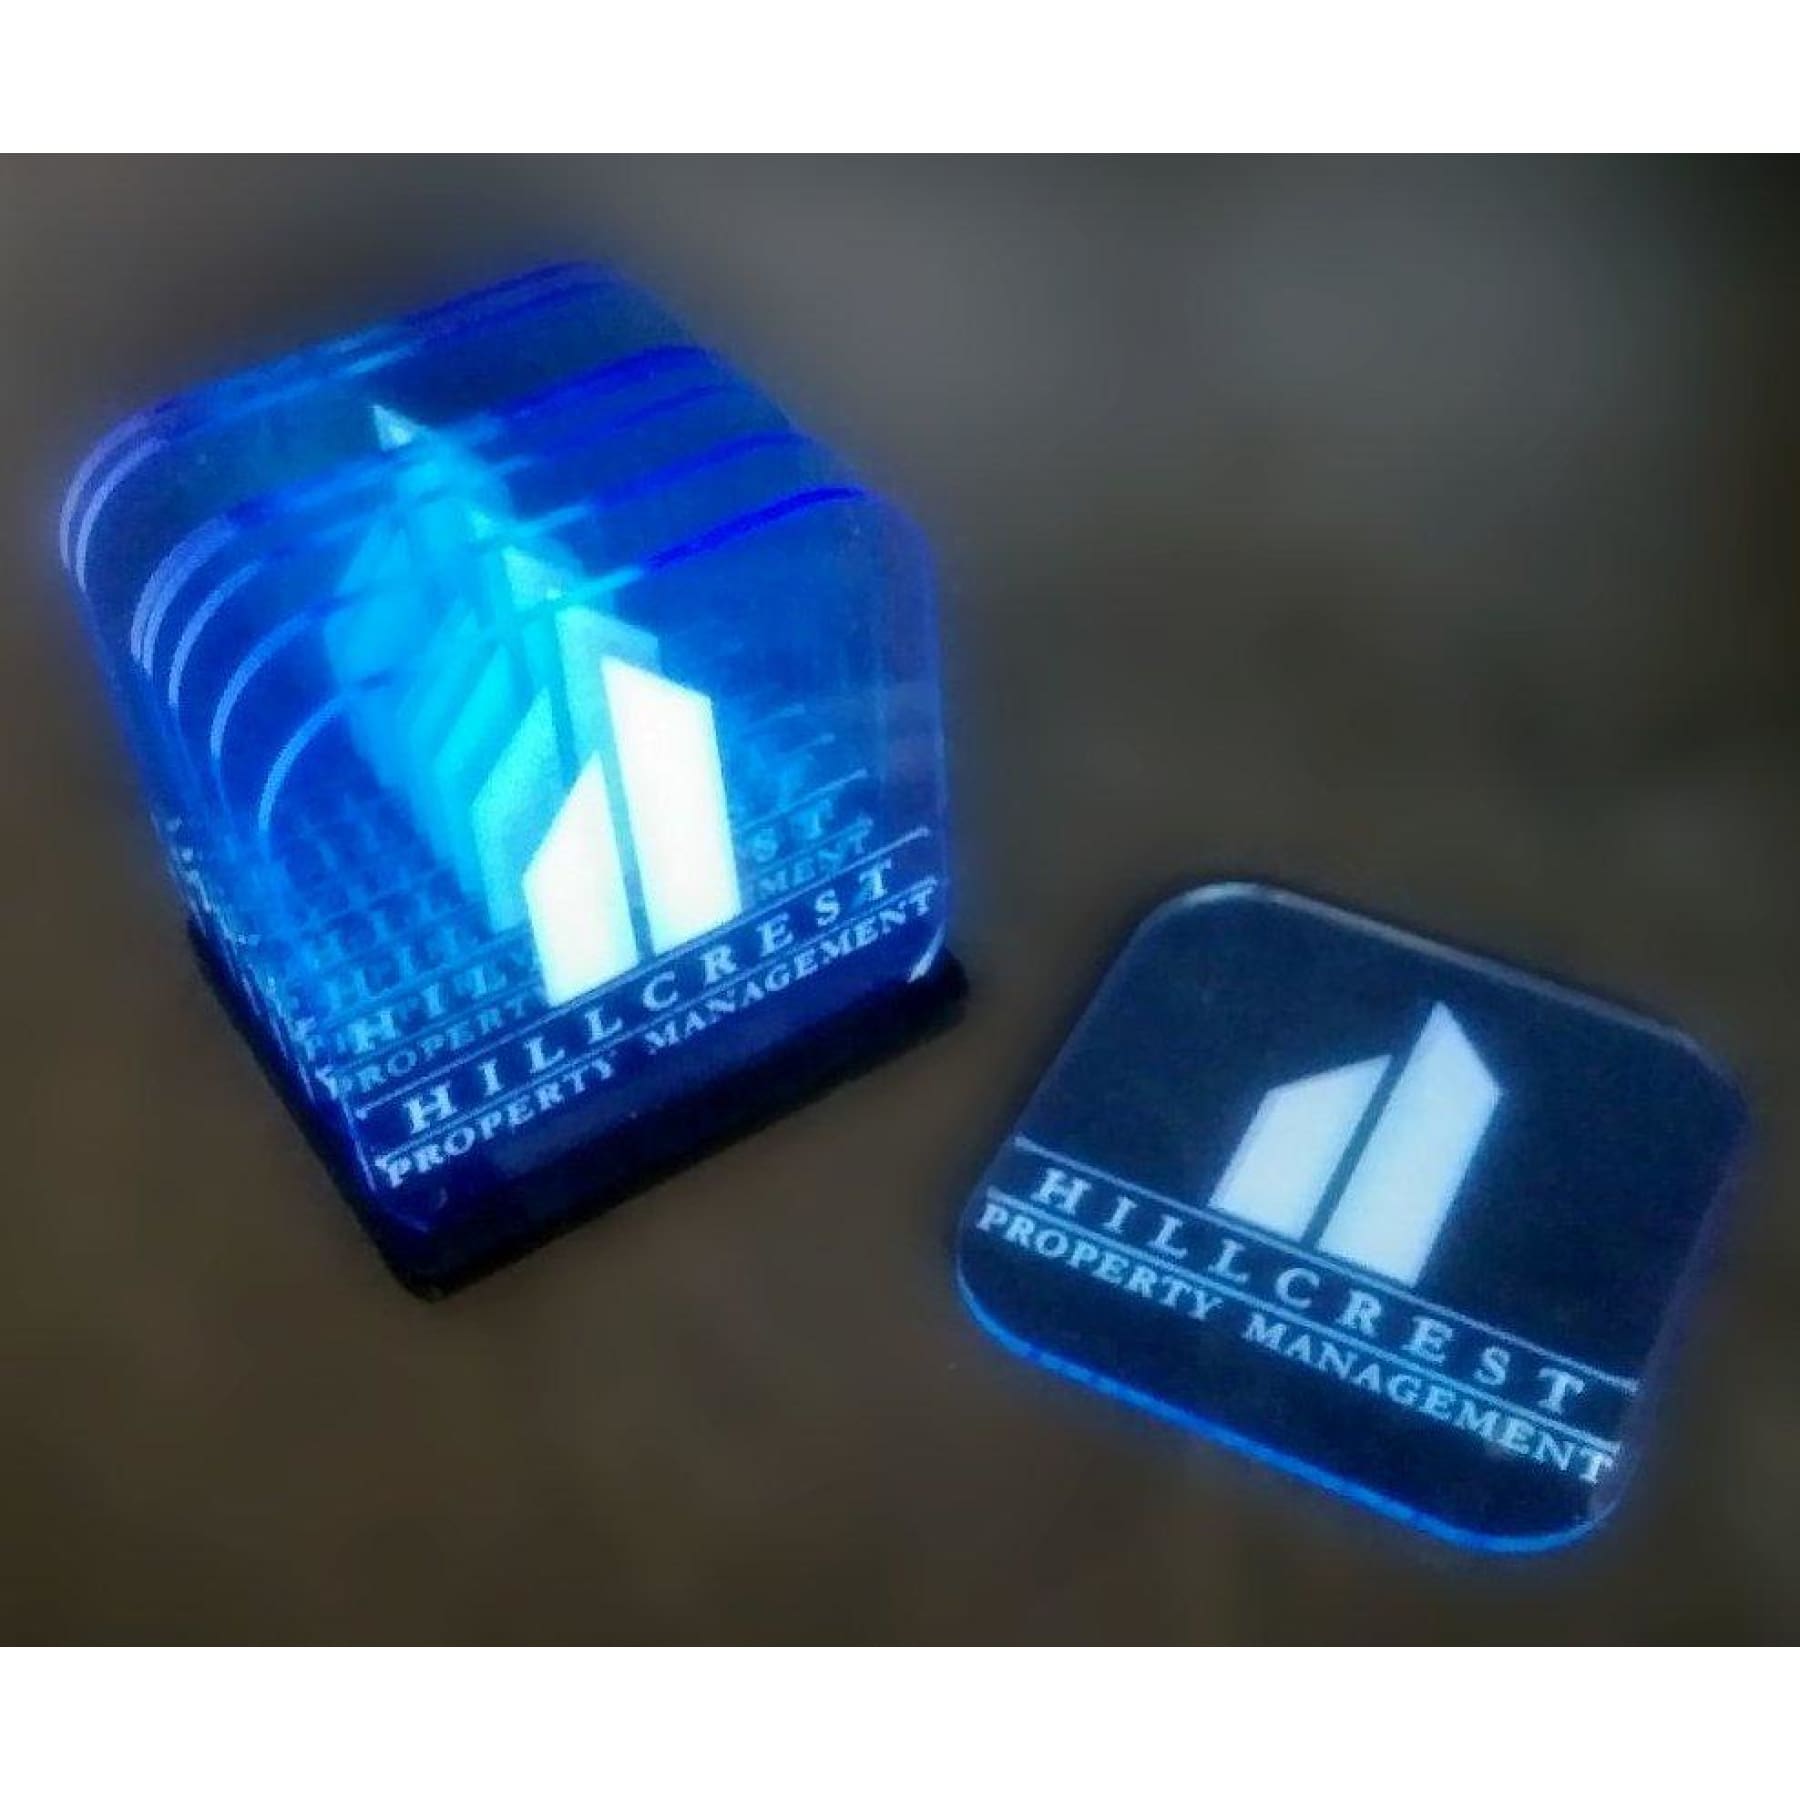 630laser - Custom Coasters in Acrylic 8 pieces Set with Base Laser Cut  include Any logo Engraved - 630laser